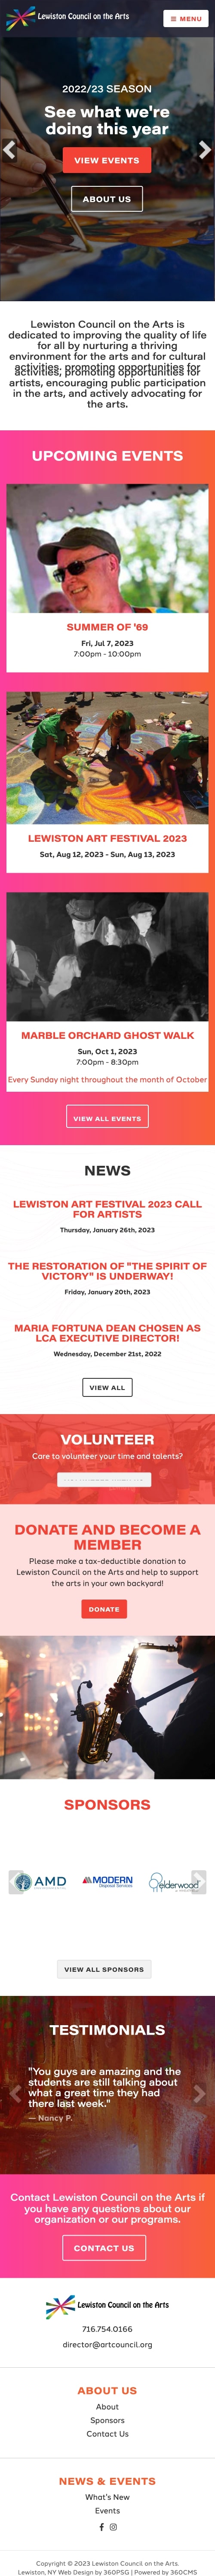 Lewiston Council on the Arts Website - Mobile